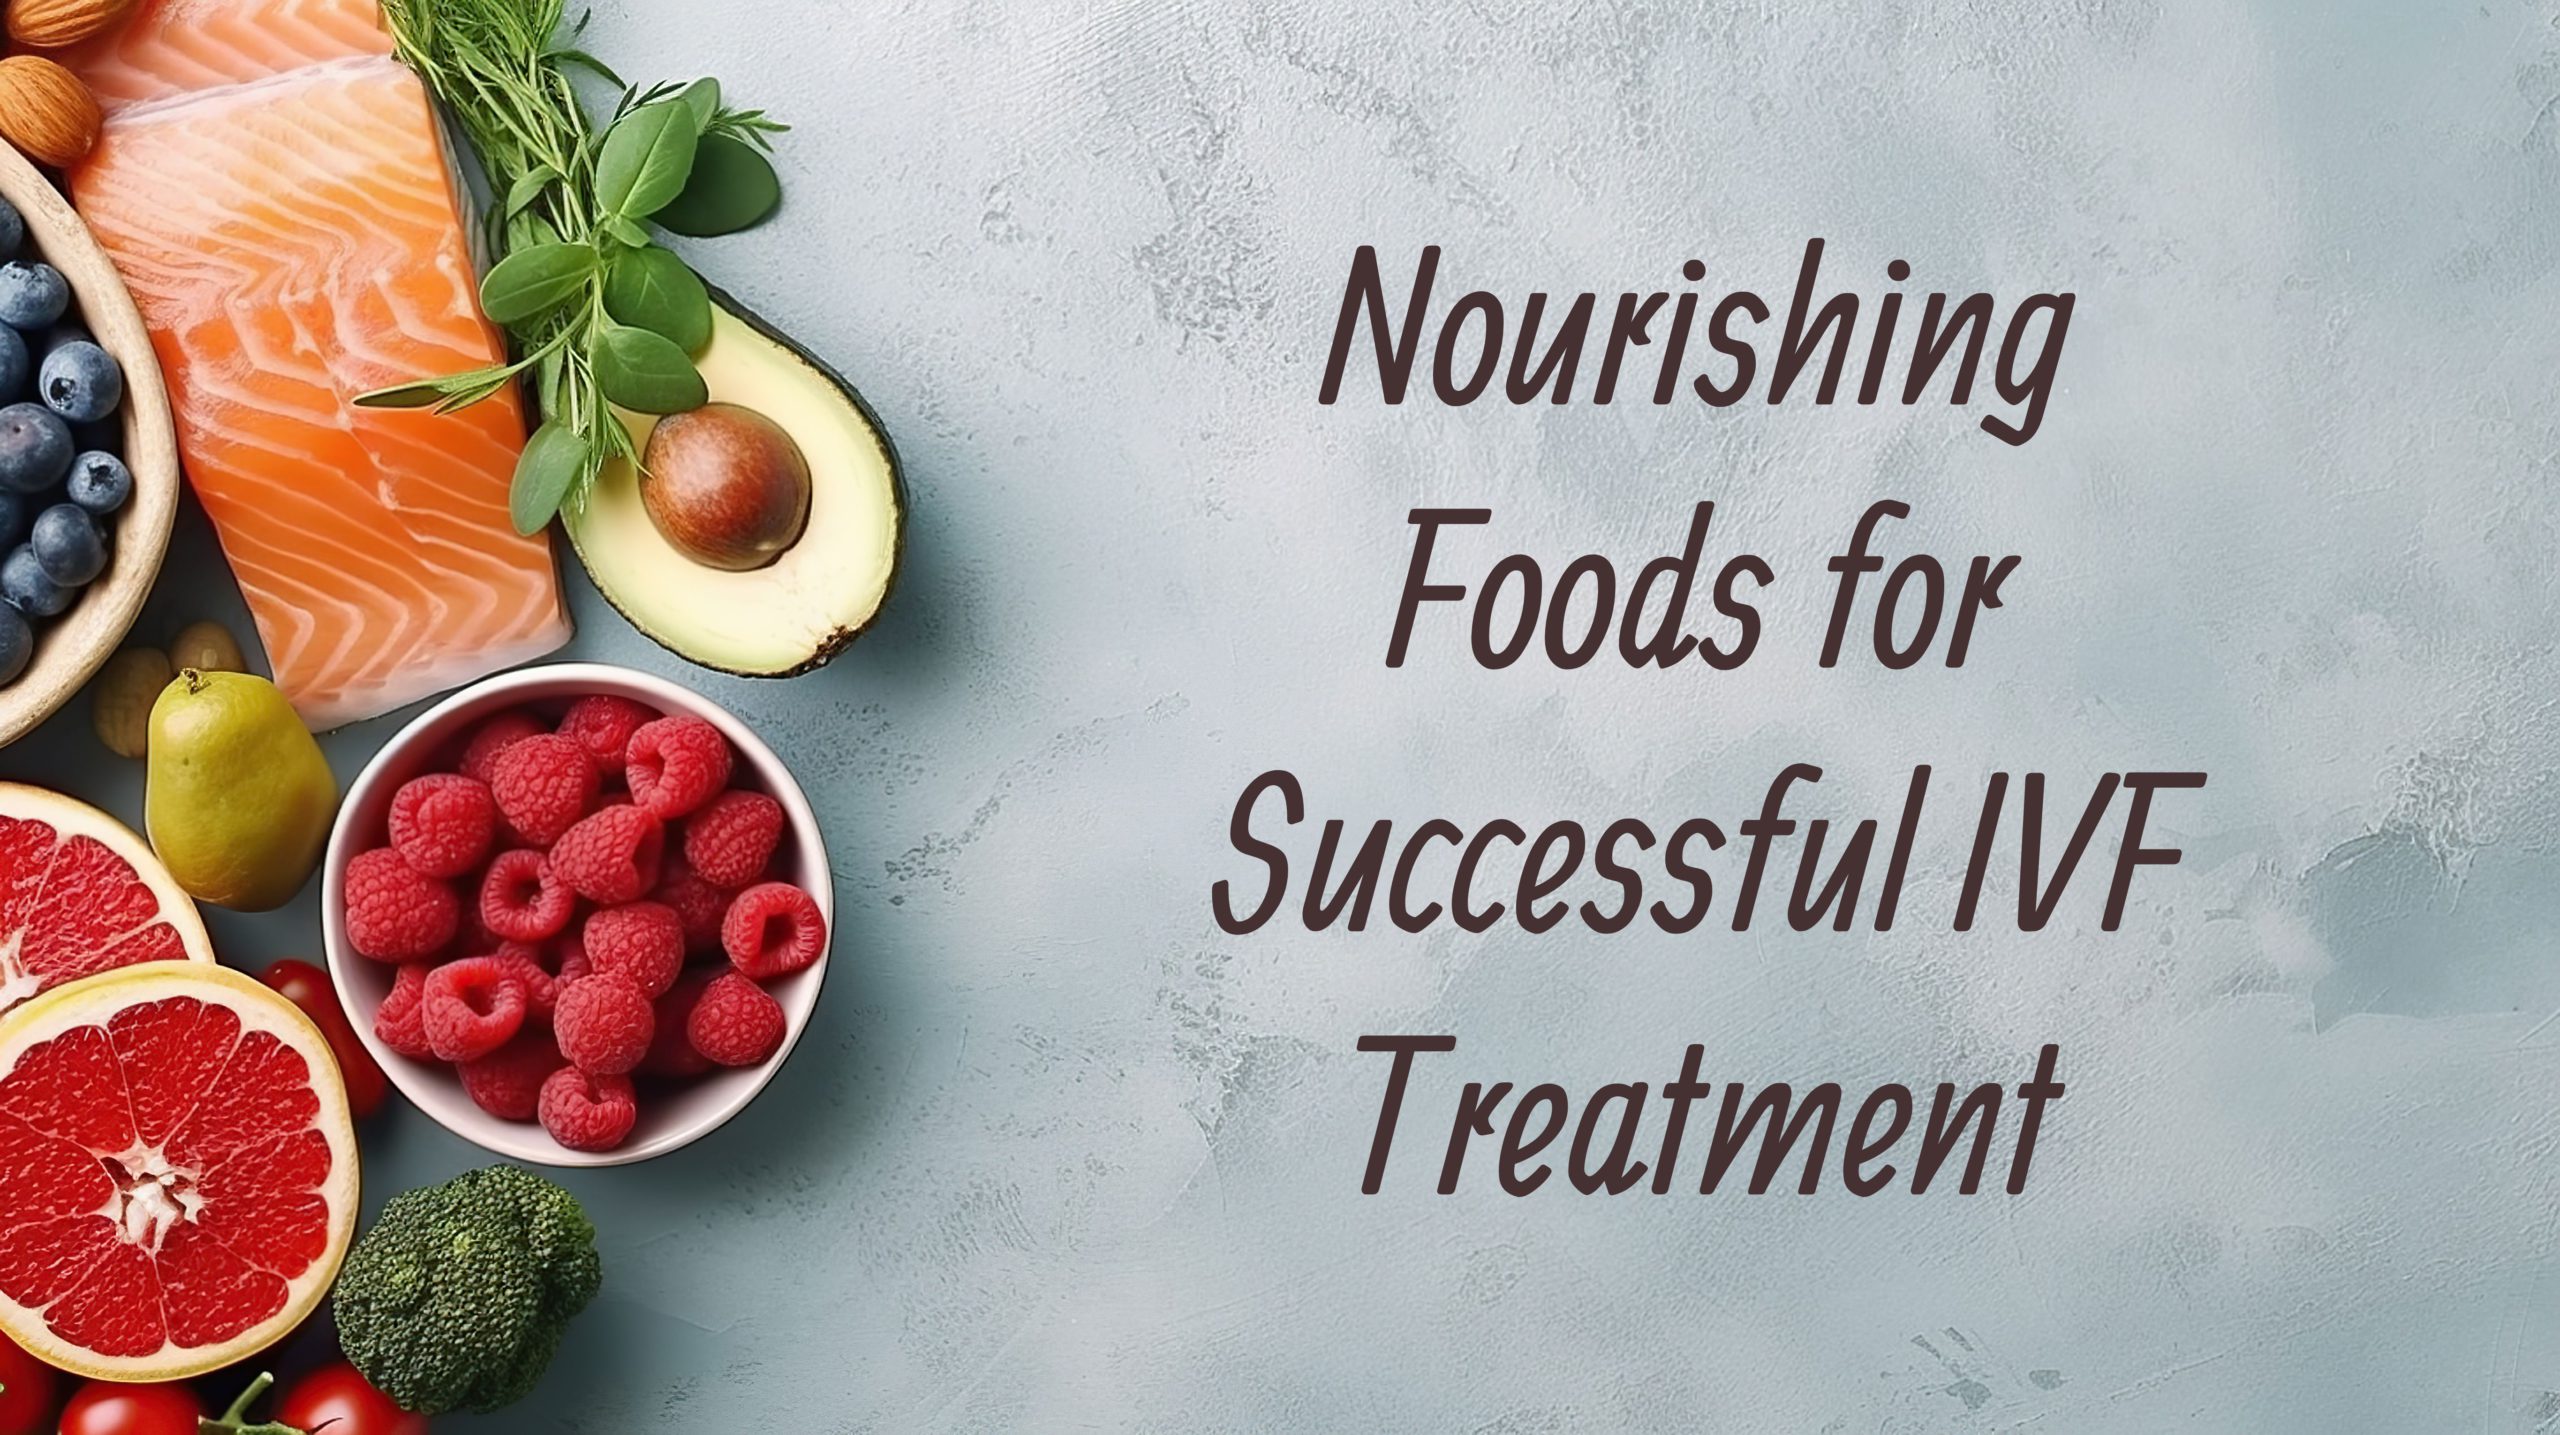 Nourishing Fertility with Foods for Every Menstrual Phase